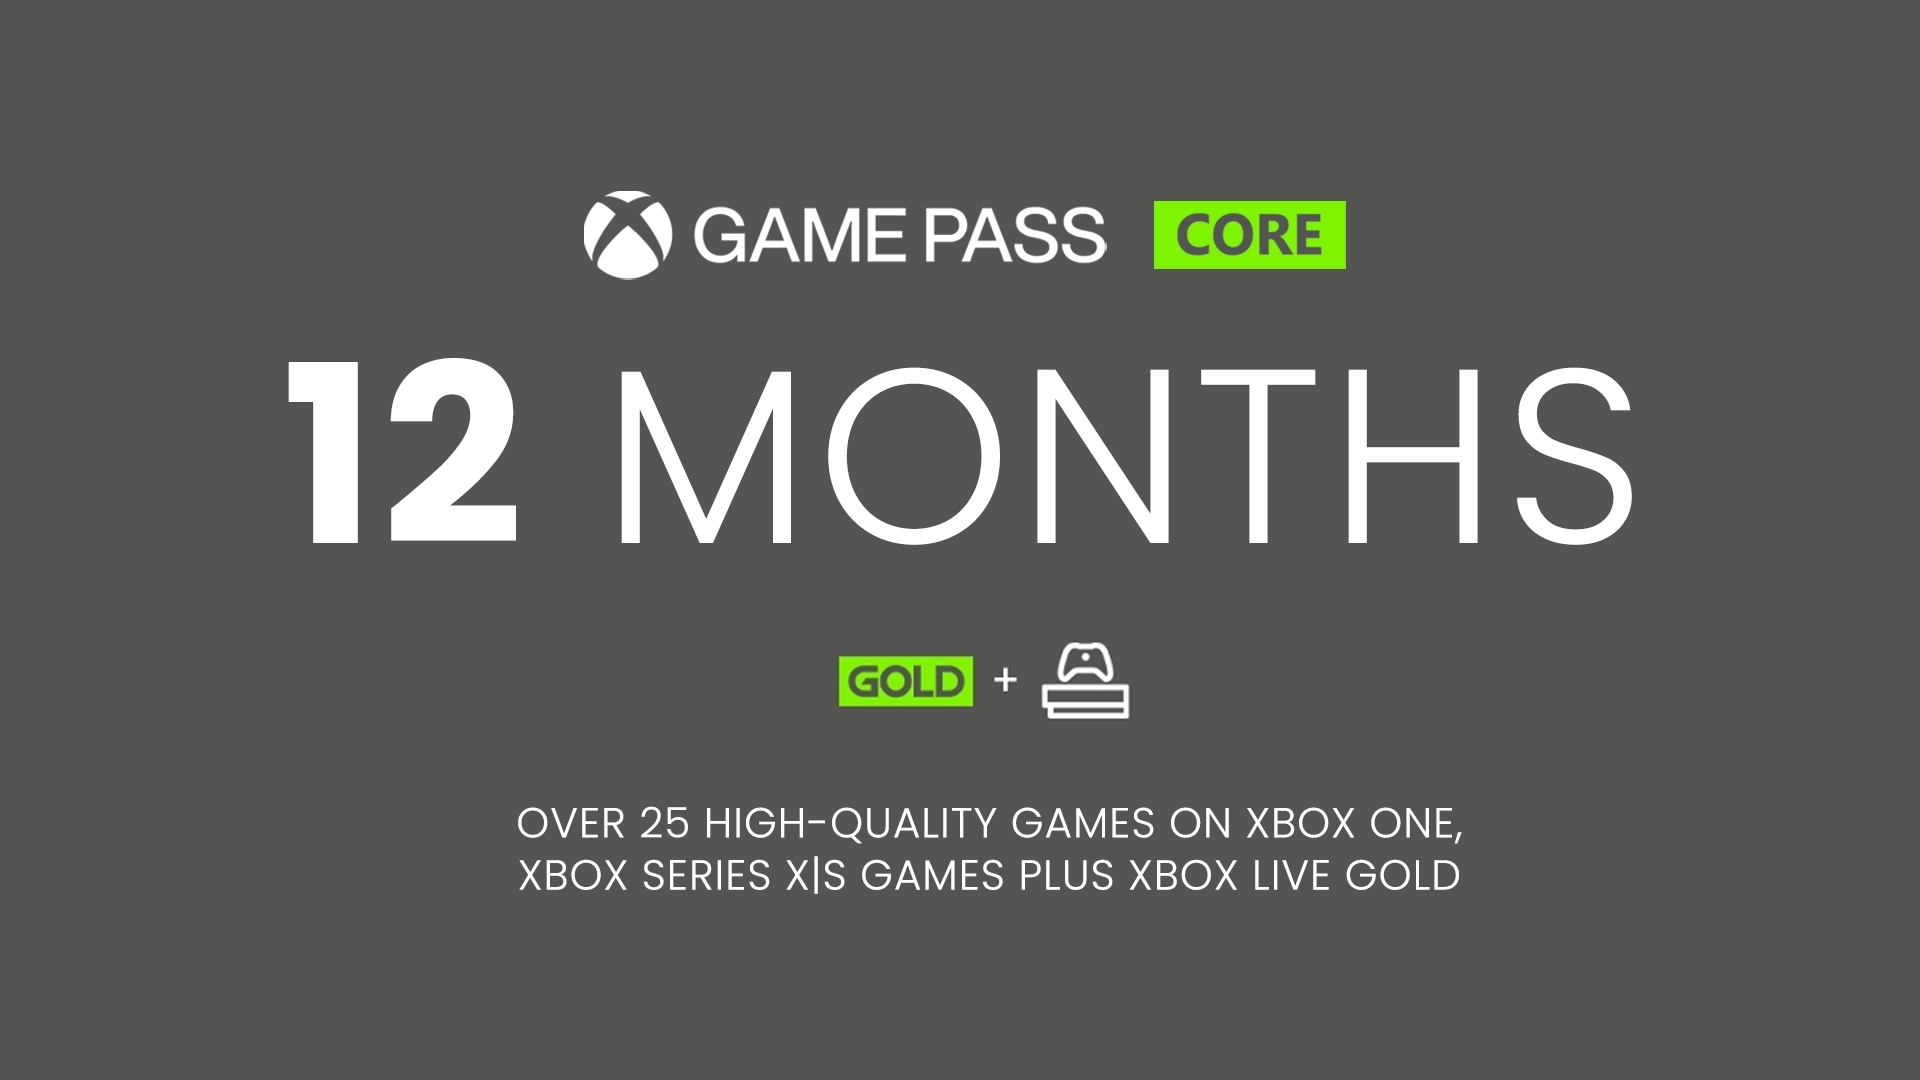 xbox live 1 month subscription